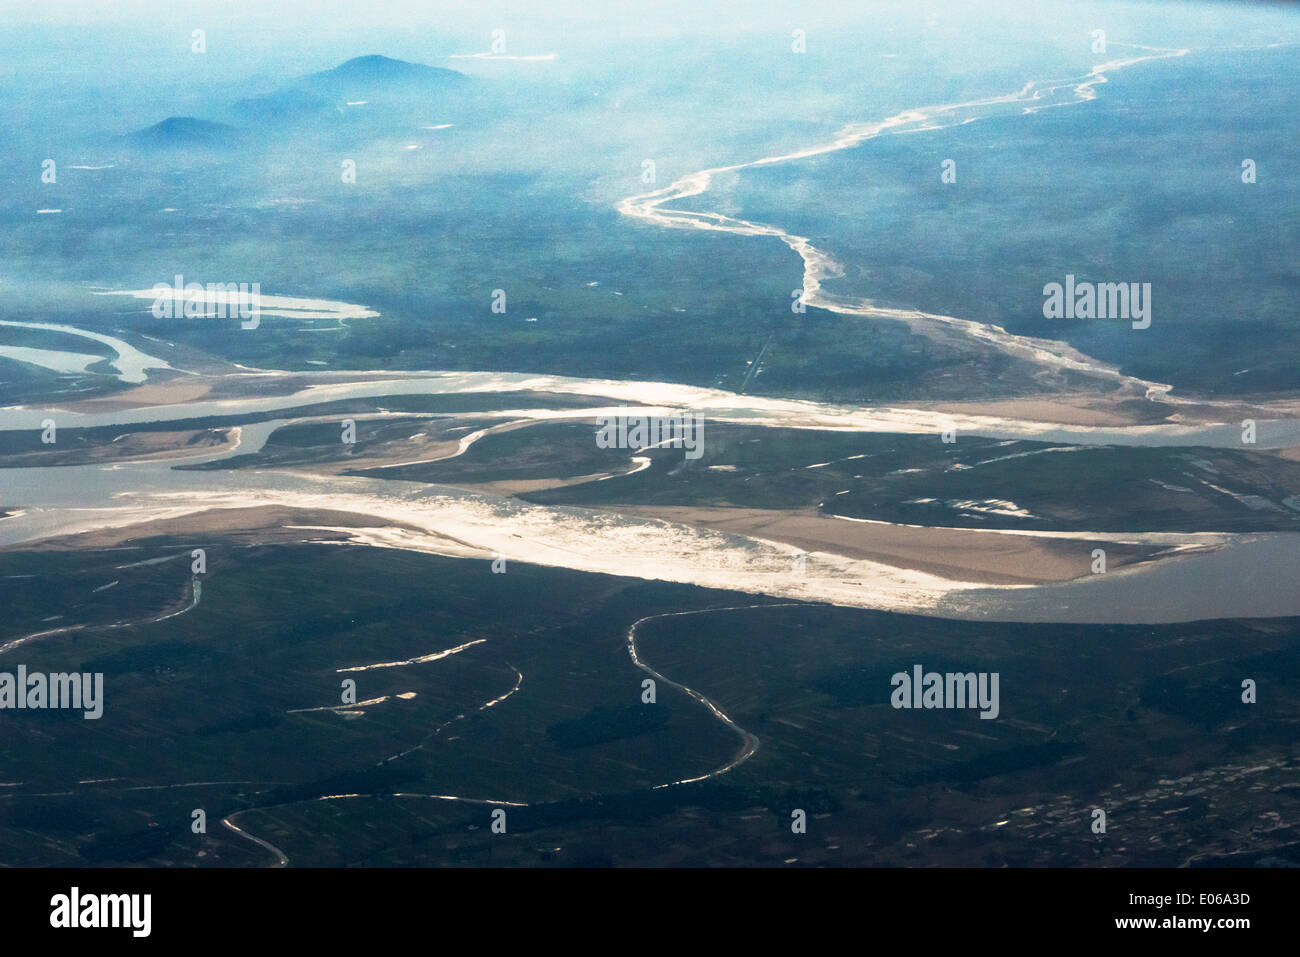 Aerial view of Irrawaddy River, Myanmar Stock Photo